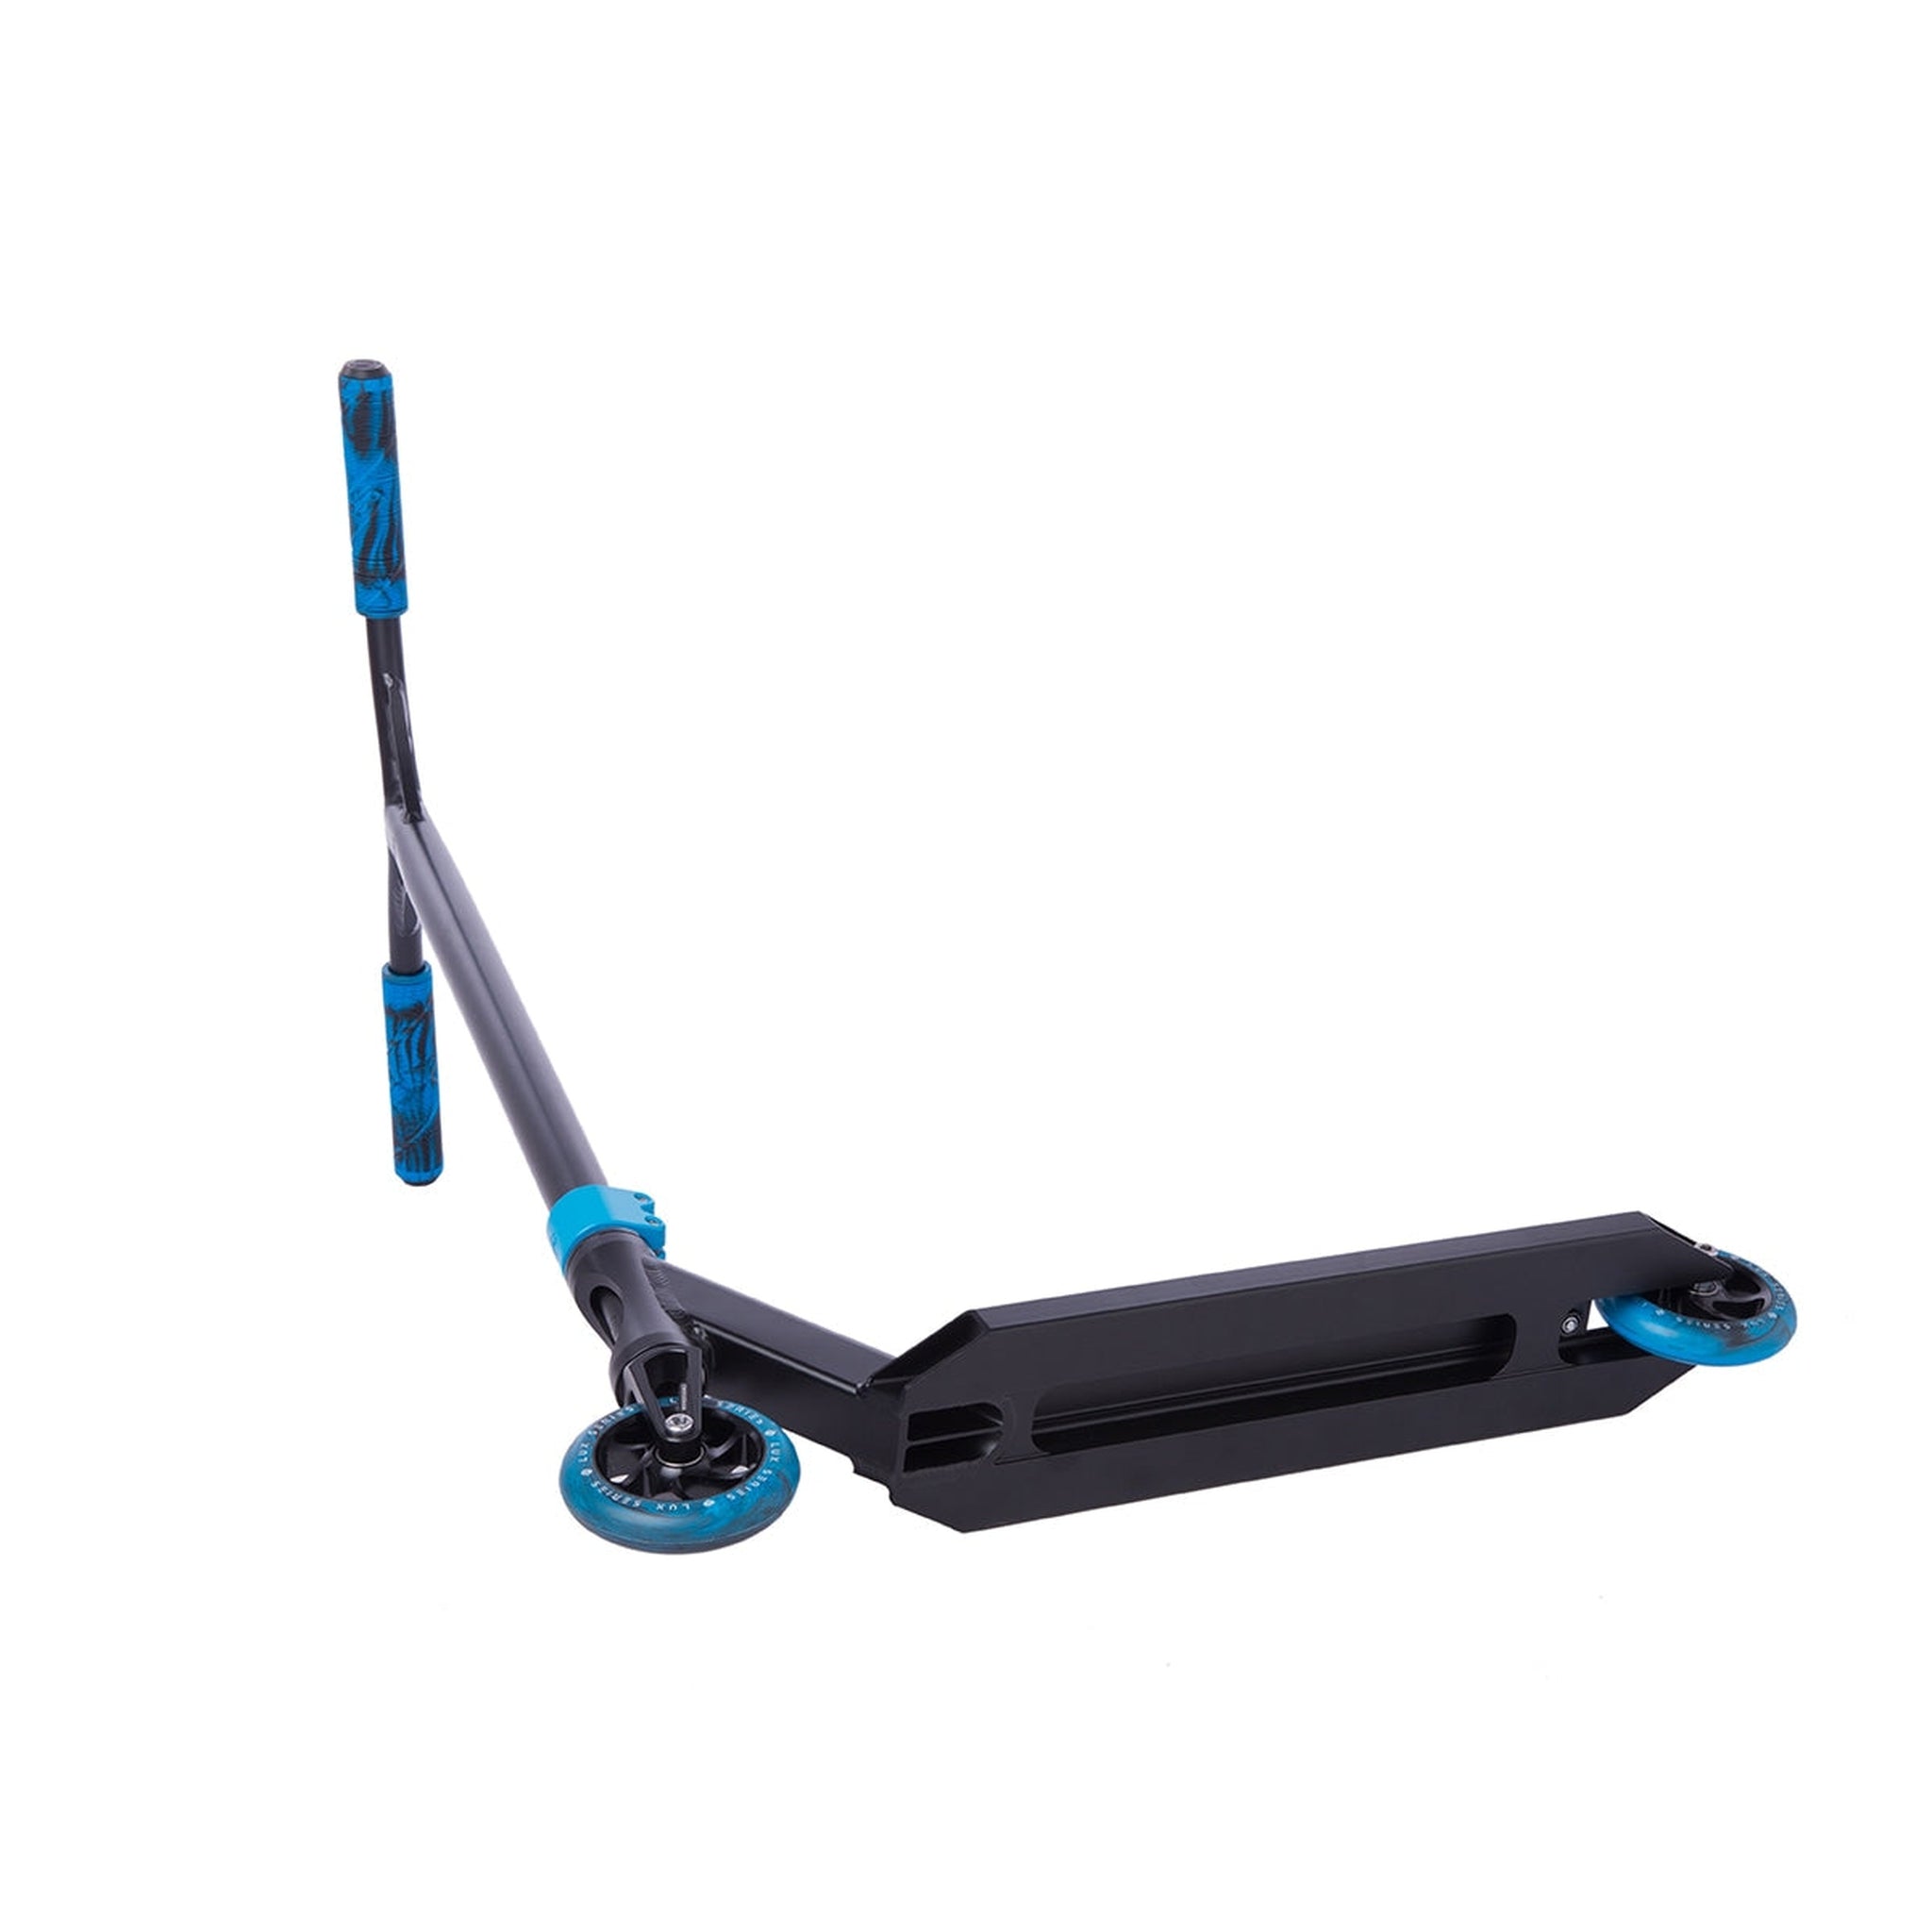 Striker Lux Painted Limited Complete Stunt Scooter - Black/Skye Blue-Stunt Scooters-Striker scooter parts